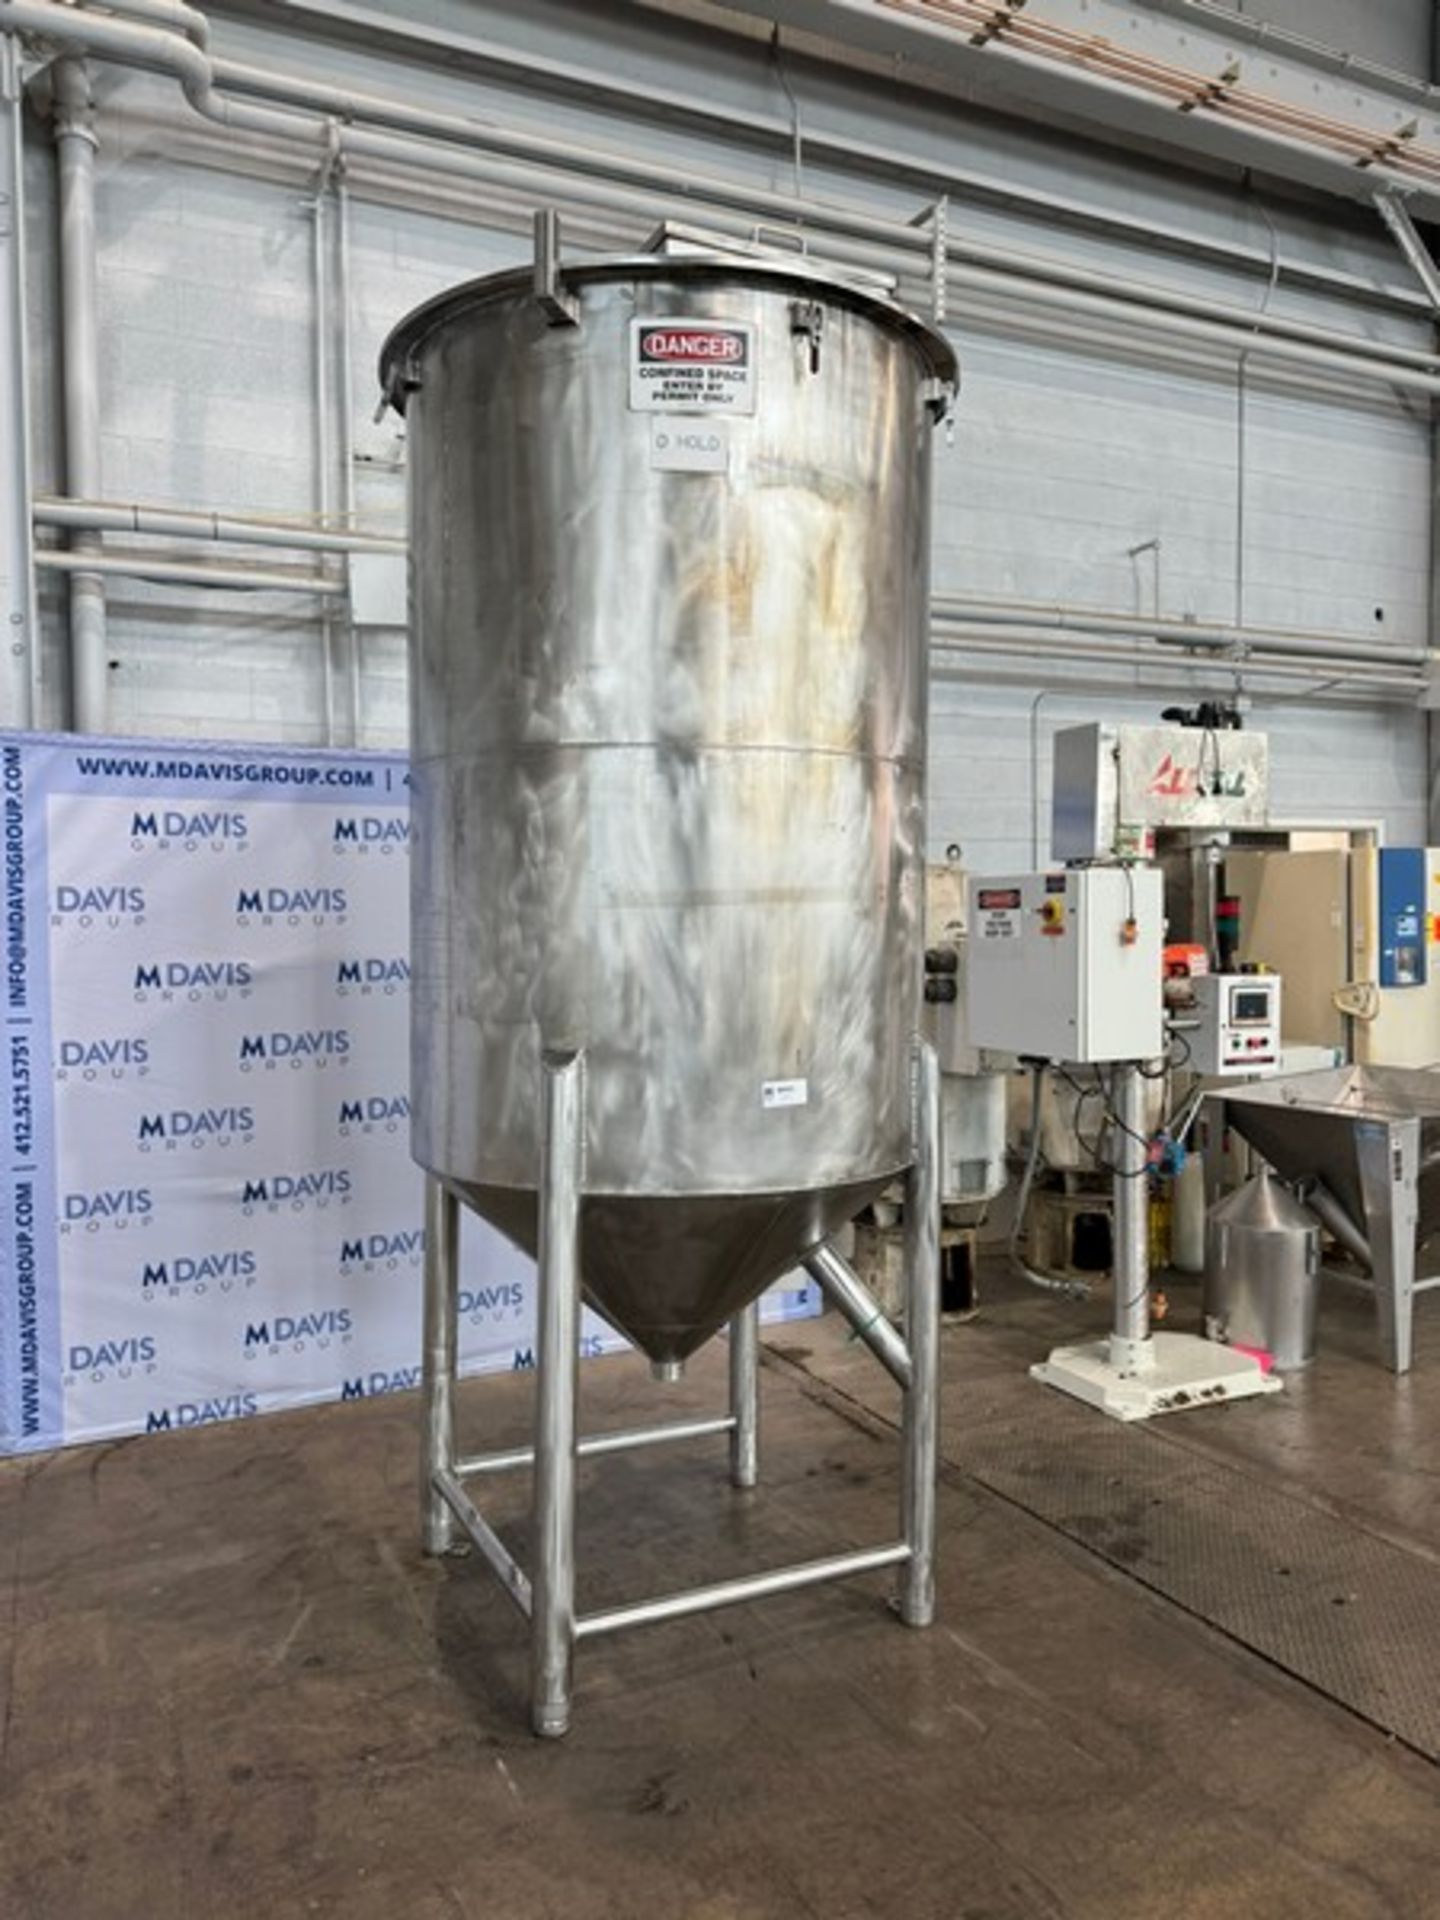 Aprox. 500 Gal. S/S Single Wall Tank, Vessel Dims.: Aprox. 70" Tall x 48" Dia., with Cone Bottom, - Image 2 of 8